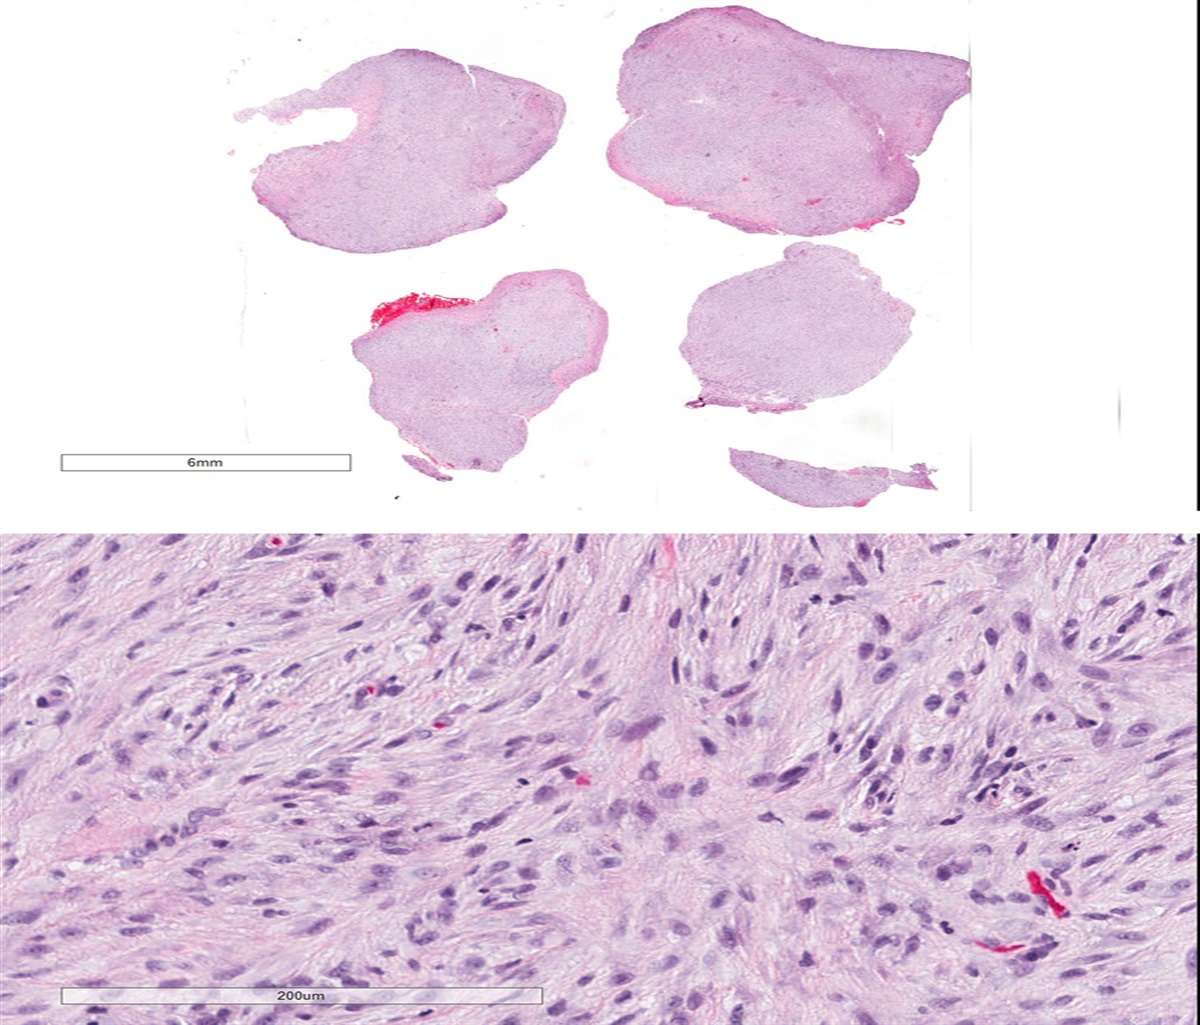 Sarcomatoid Mesothelioma With Bland Histologic Features: A Potential Pitfall in Diagnosis